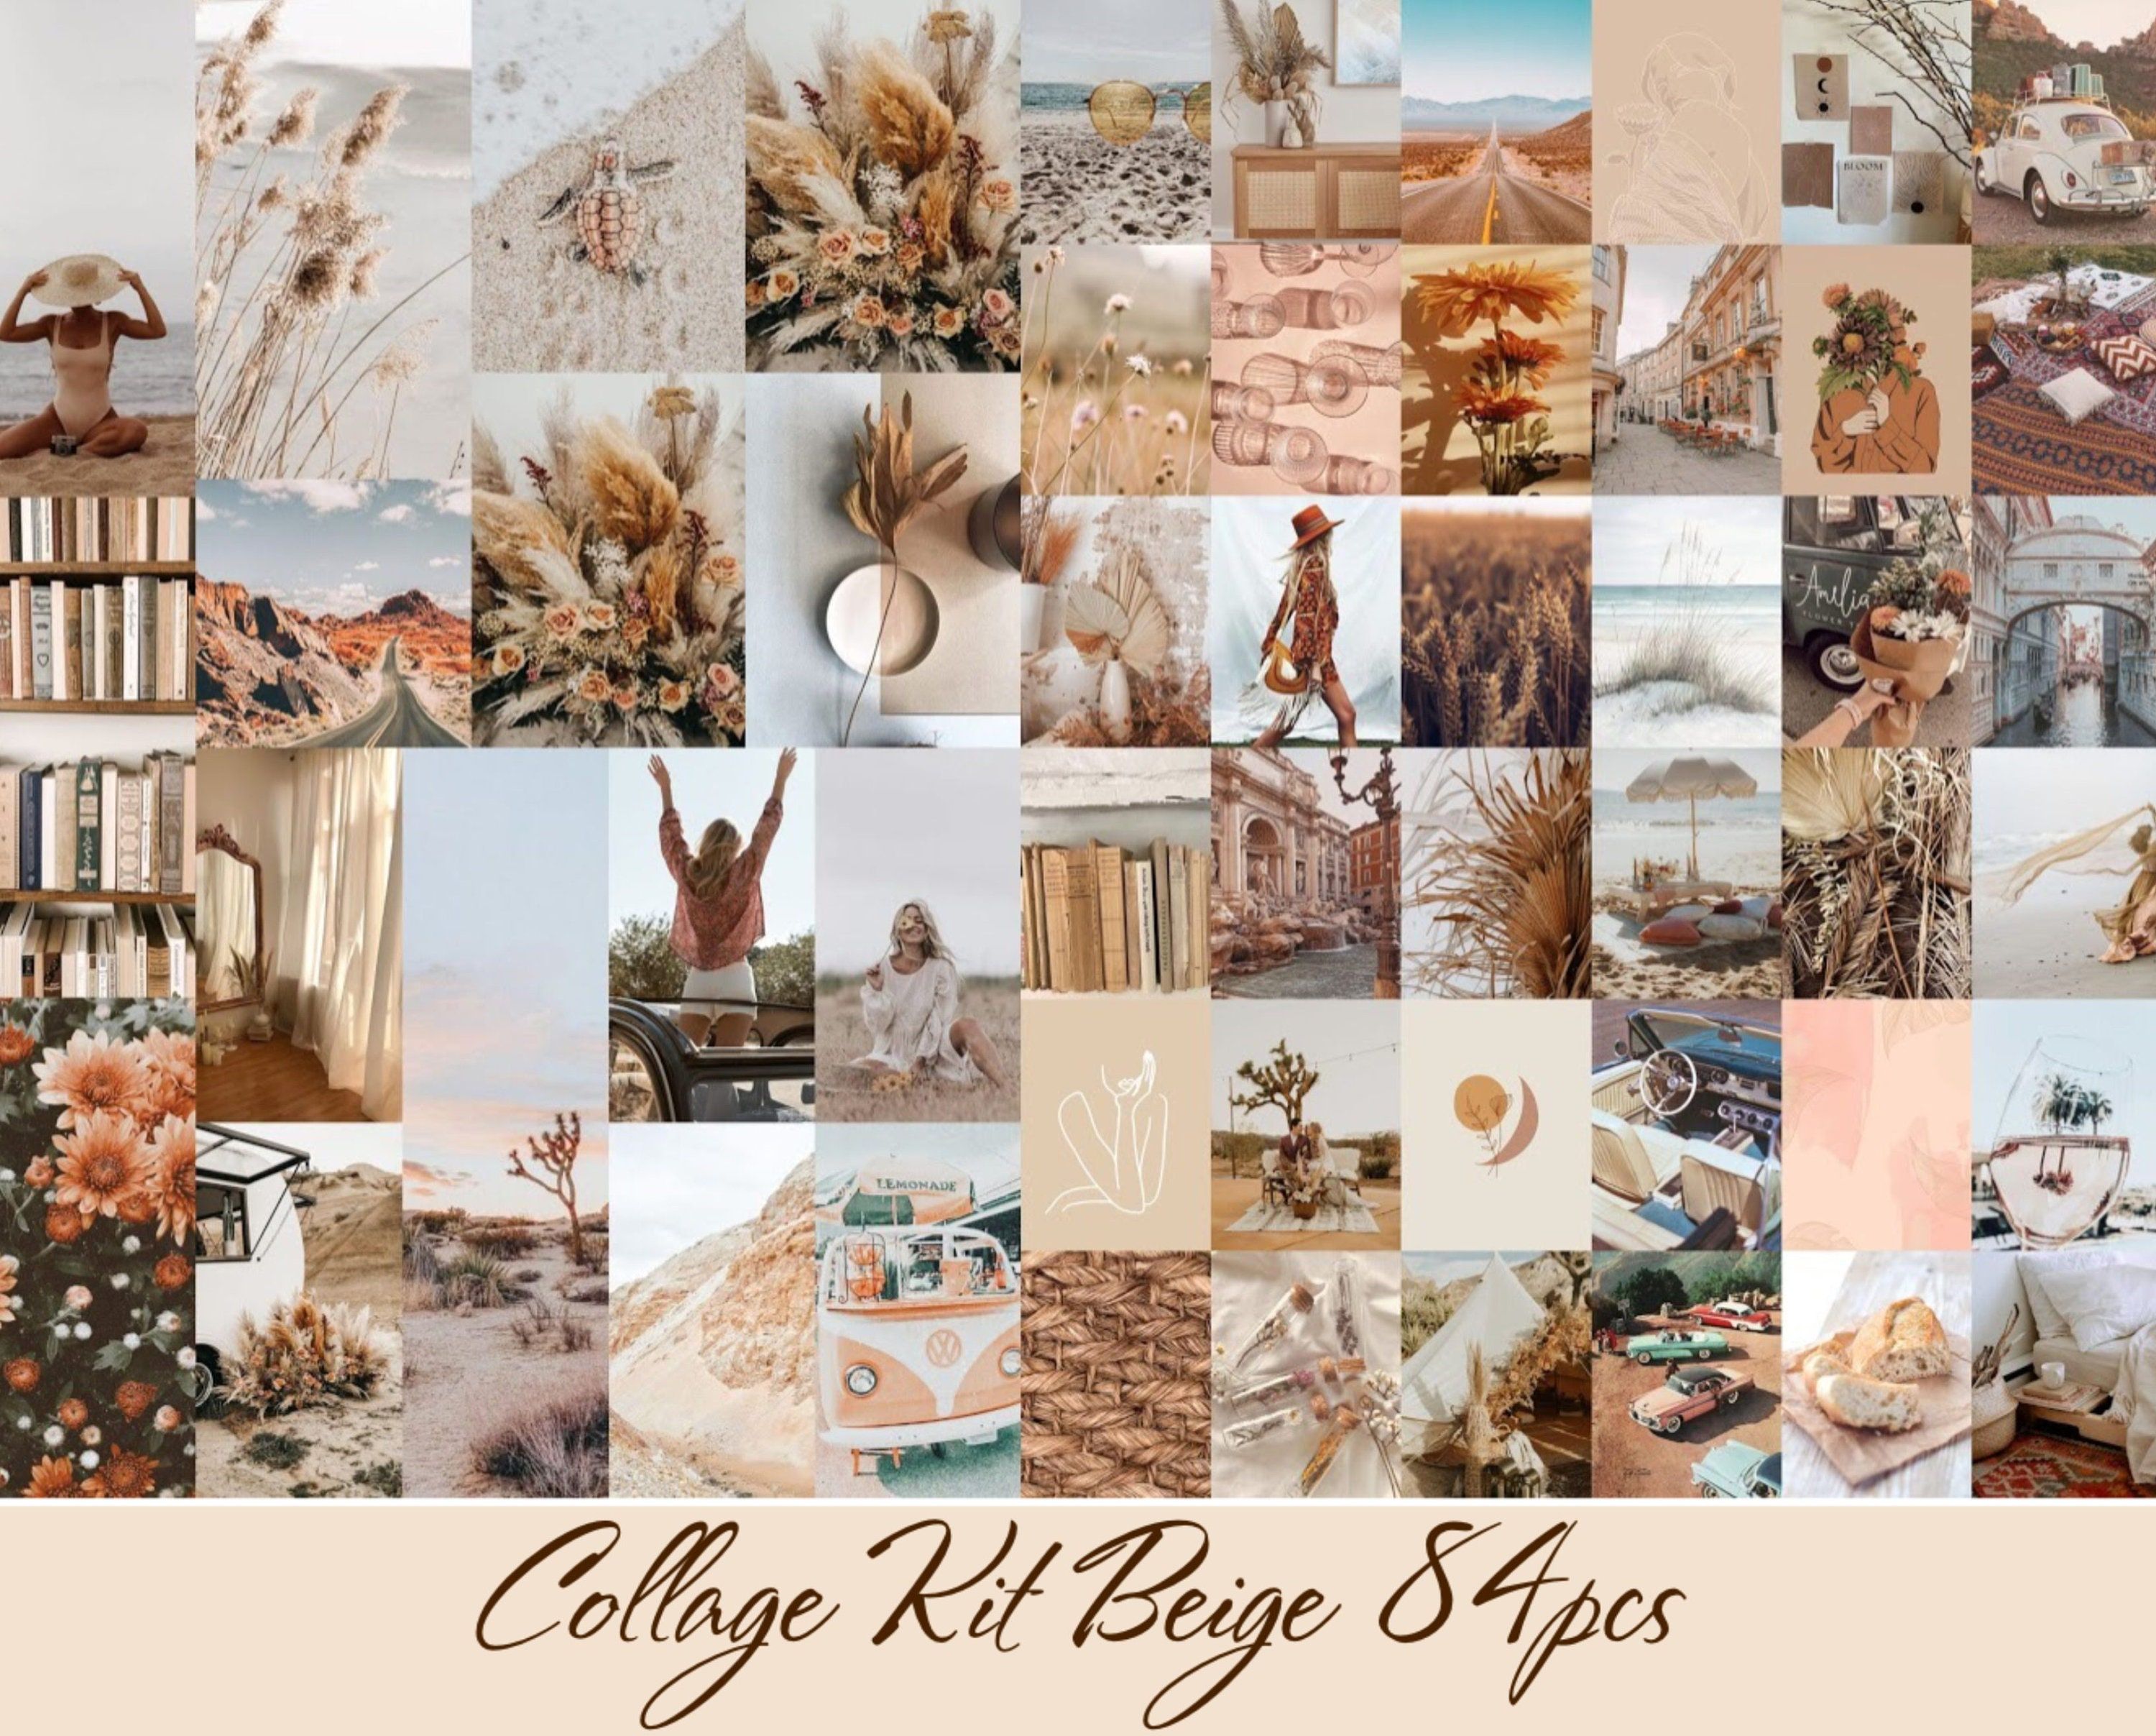 A collage of photos with the words calypso kit - Beige